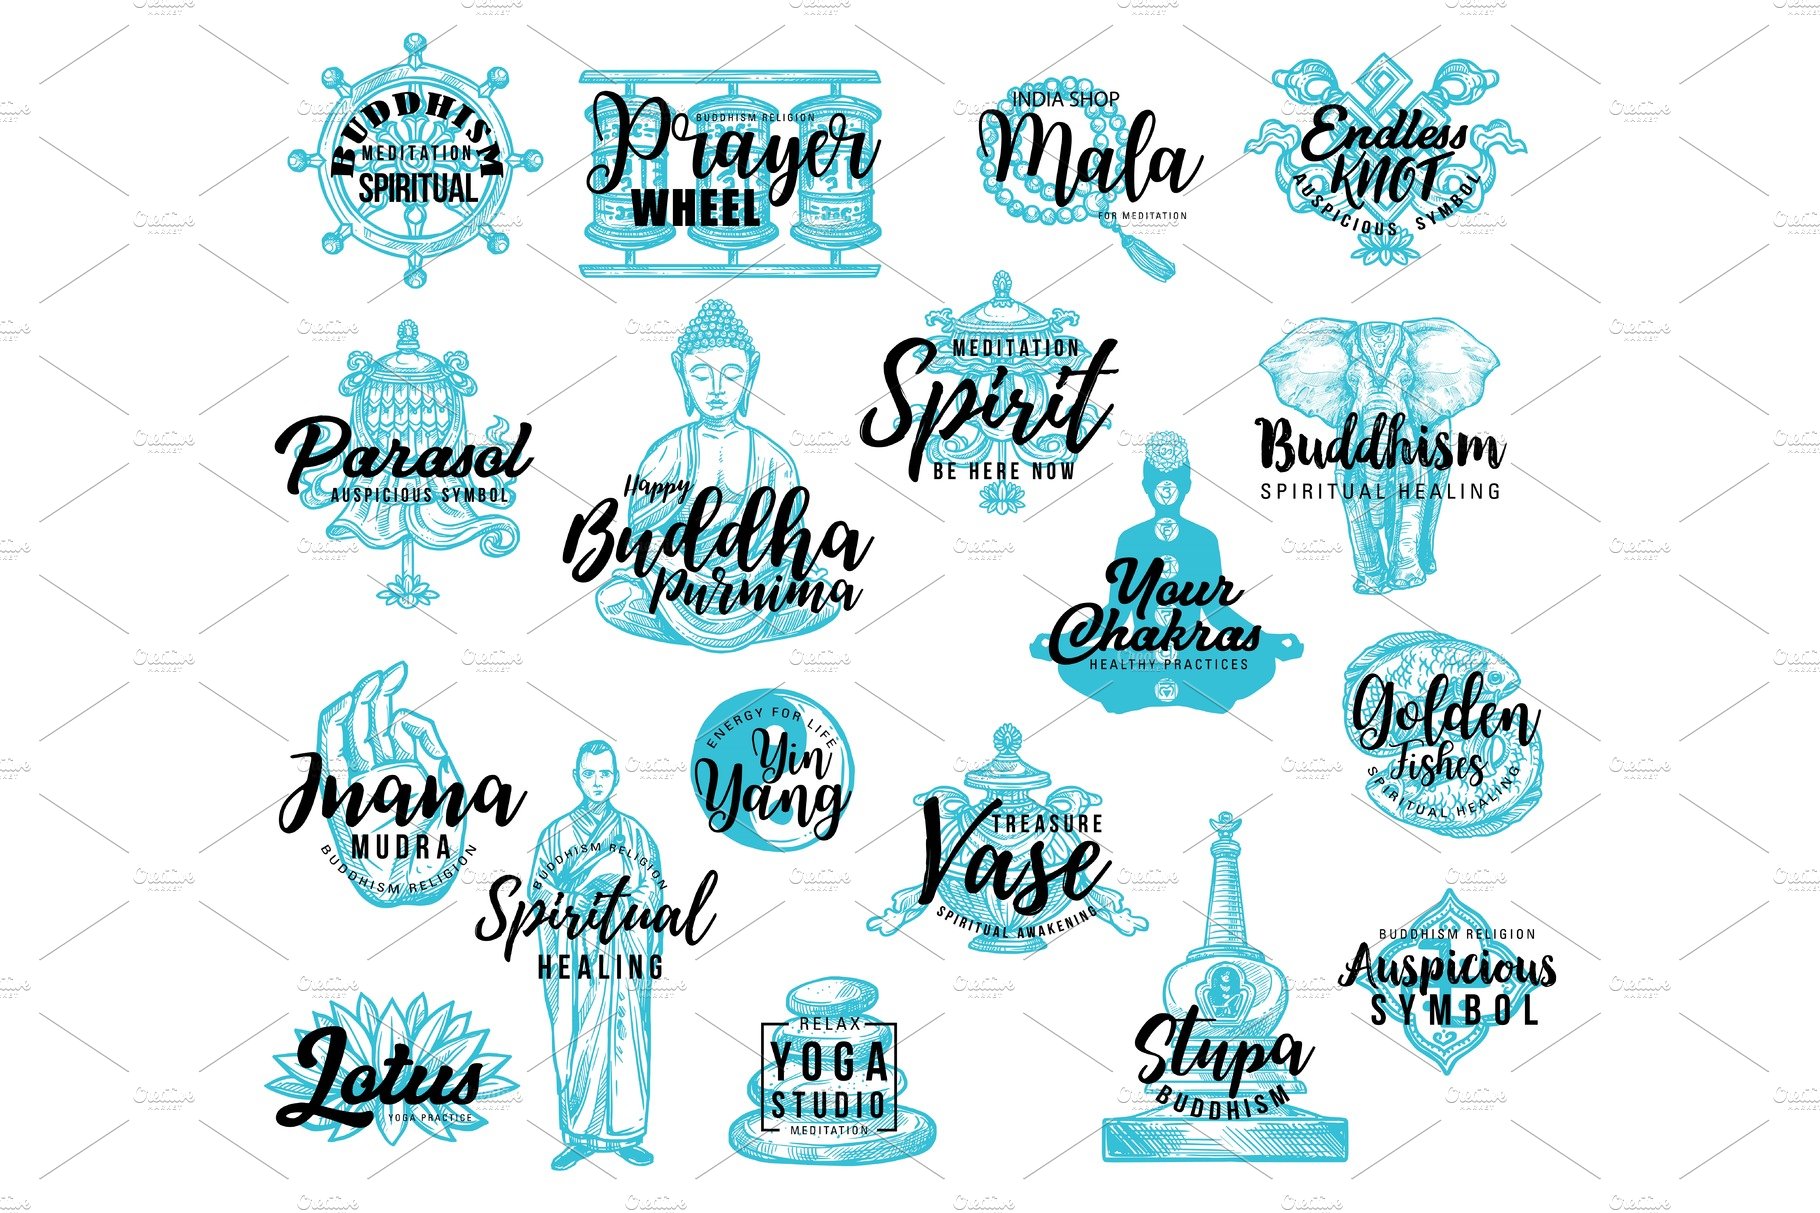 Buddhism religion icons, lettering cover image.